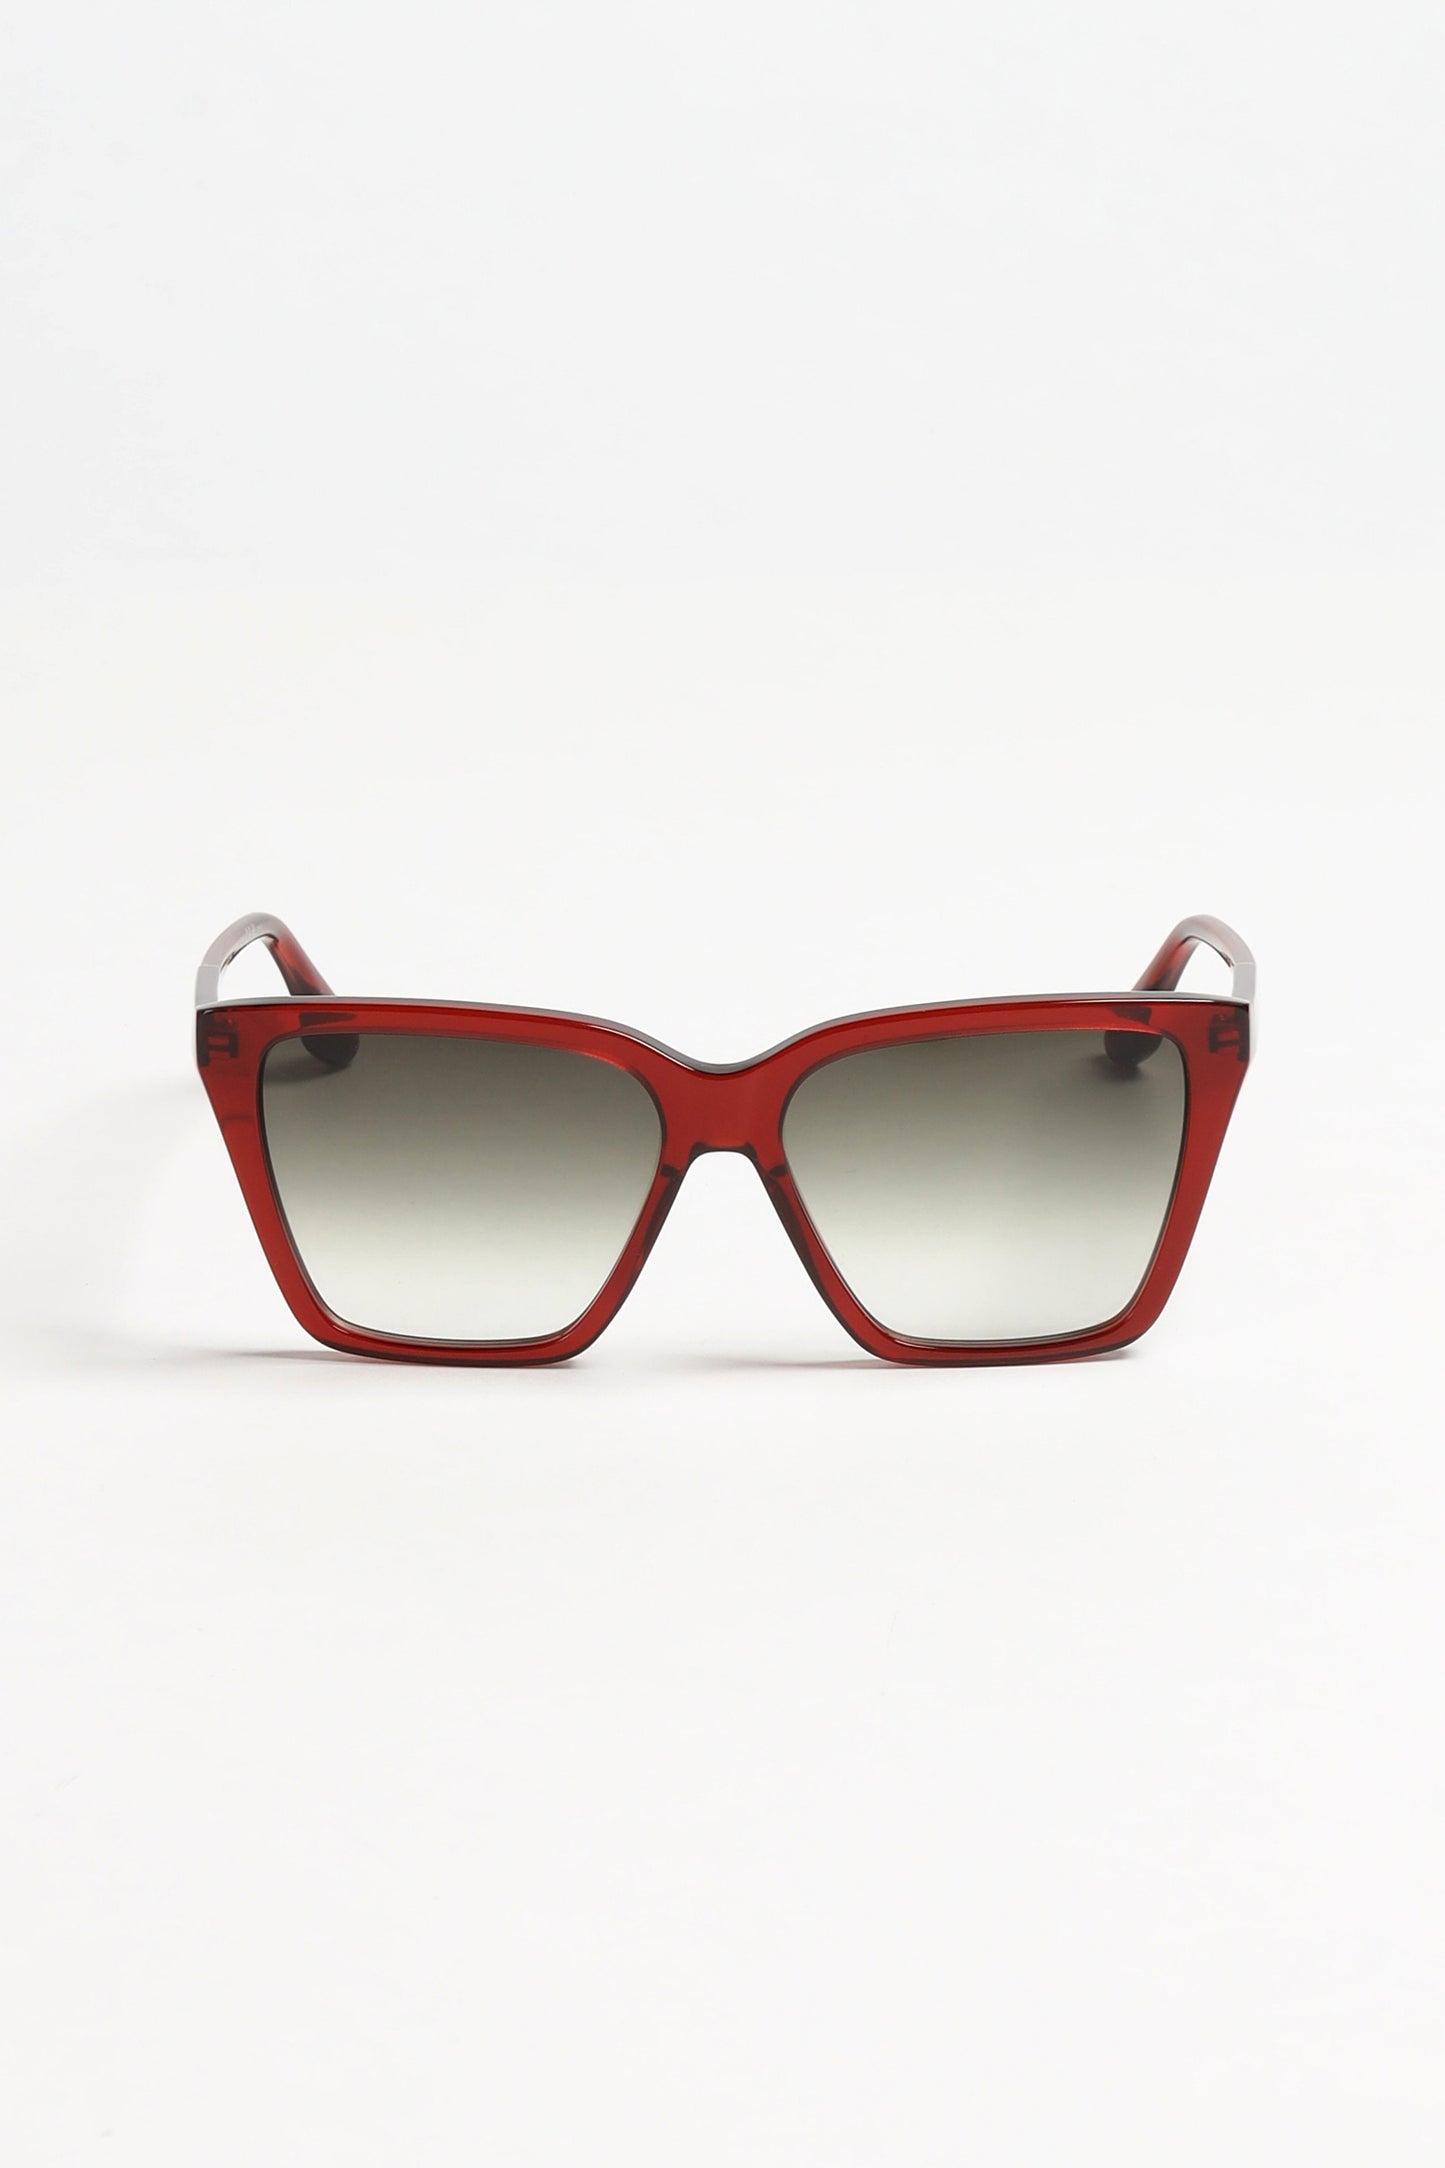 Sunglasses VB655S in red